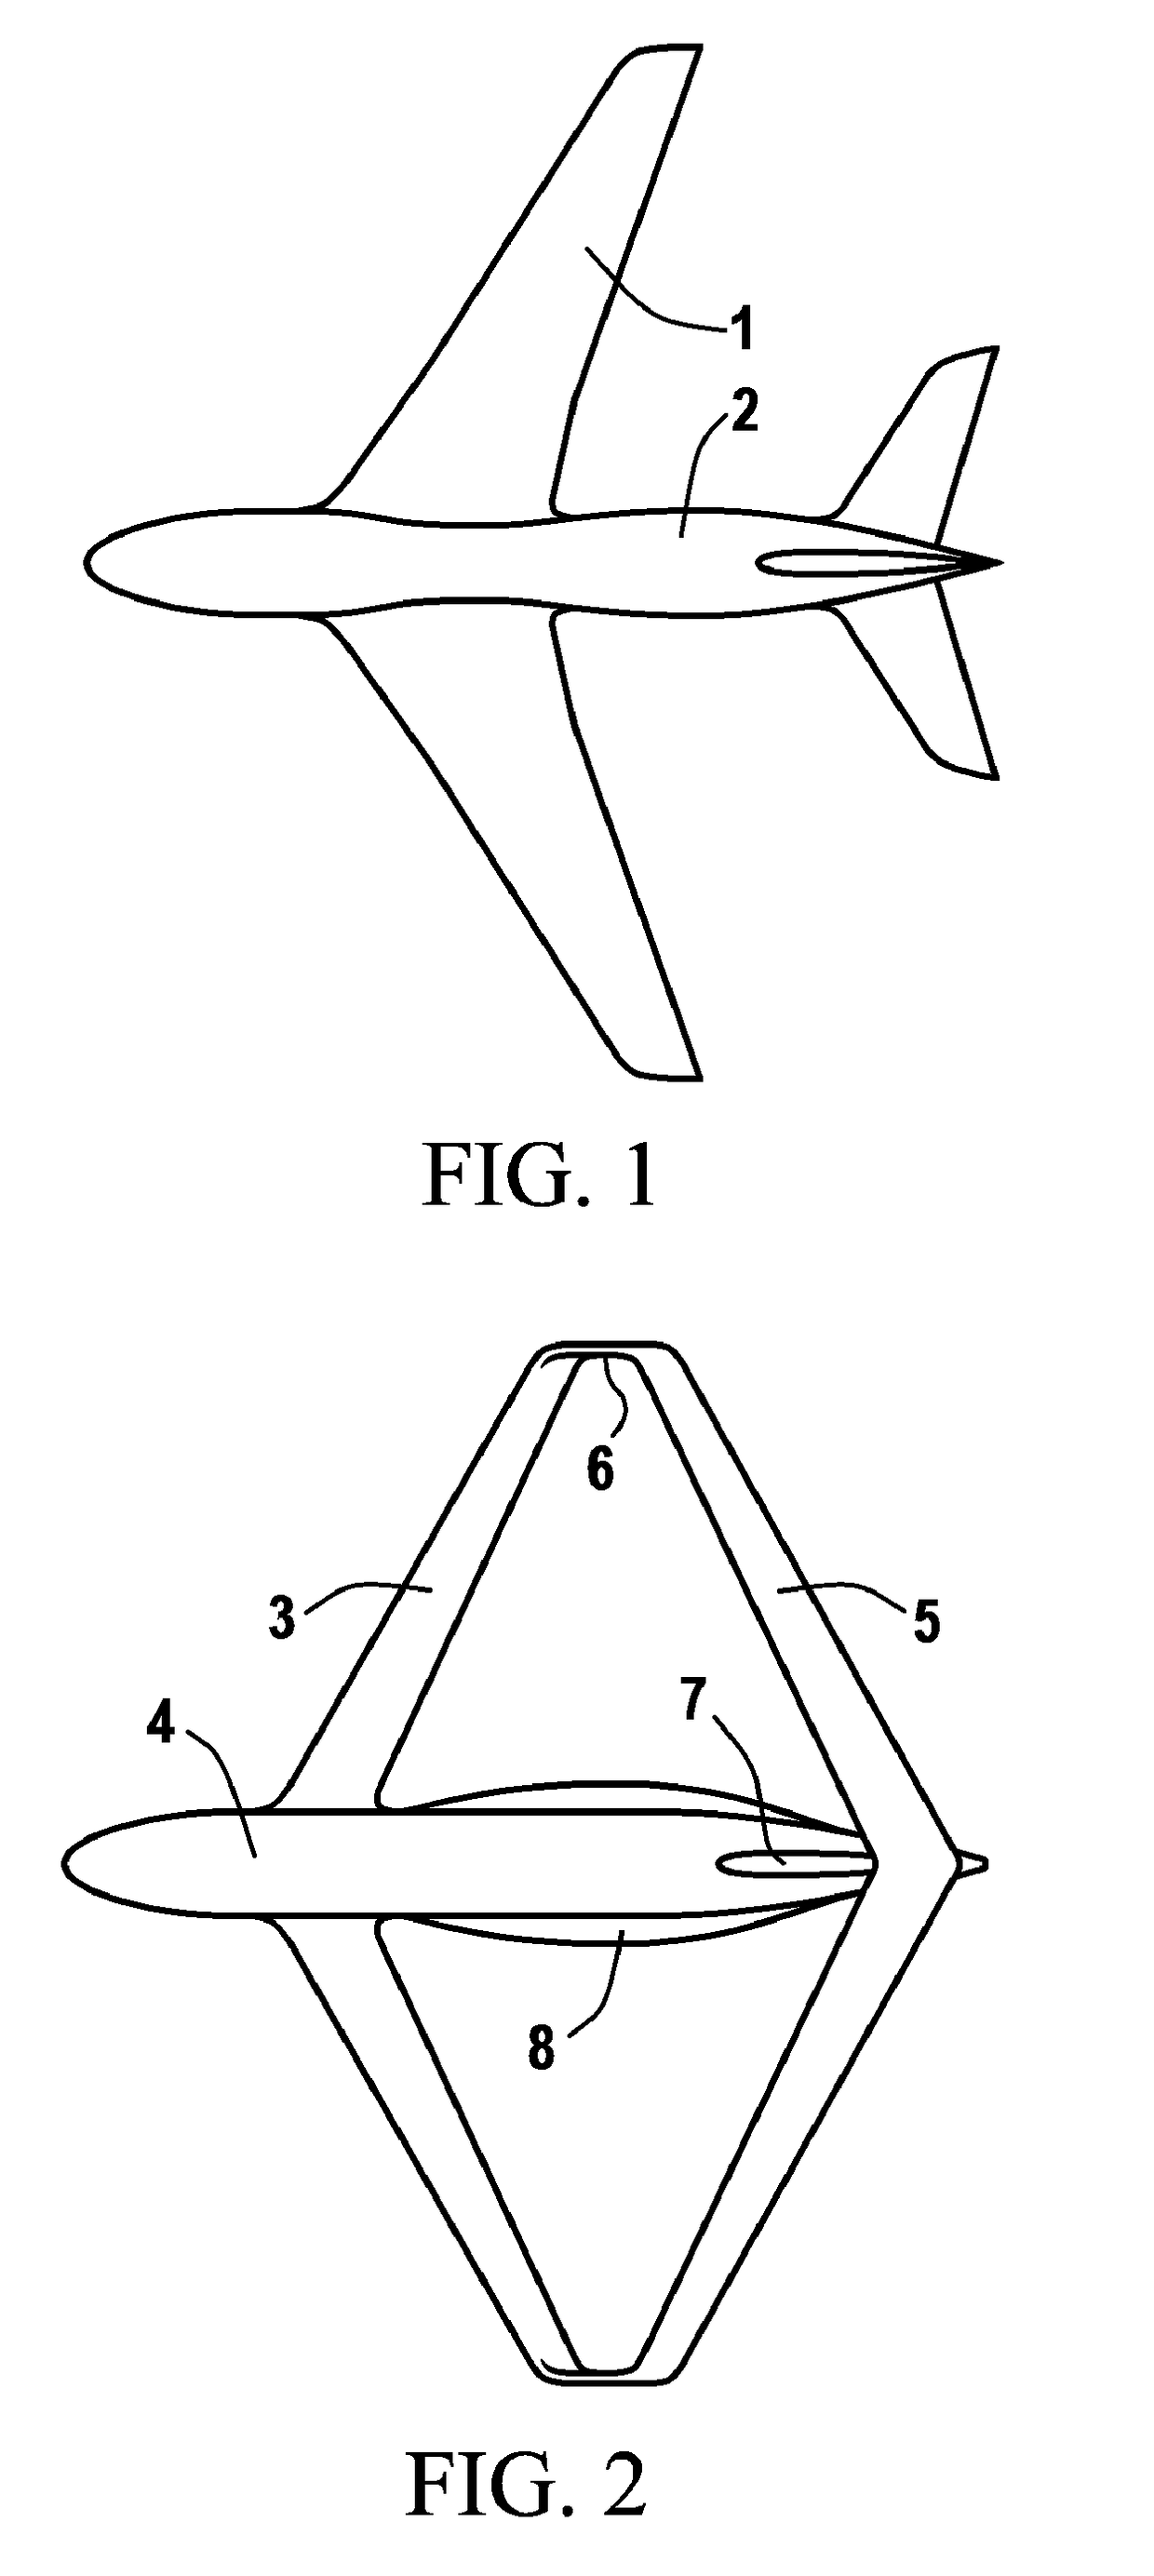 Methods for improvements of the box wing aircraft concept and corresponding aircraft configuration